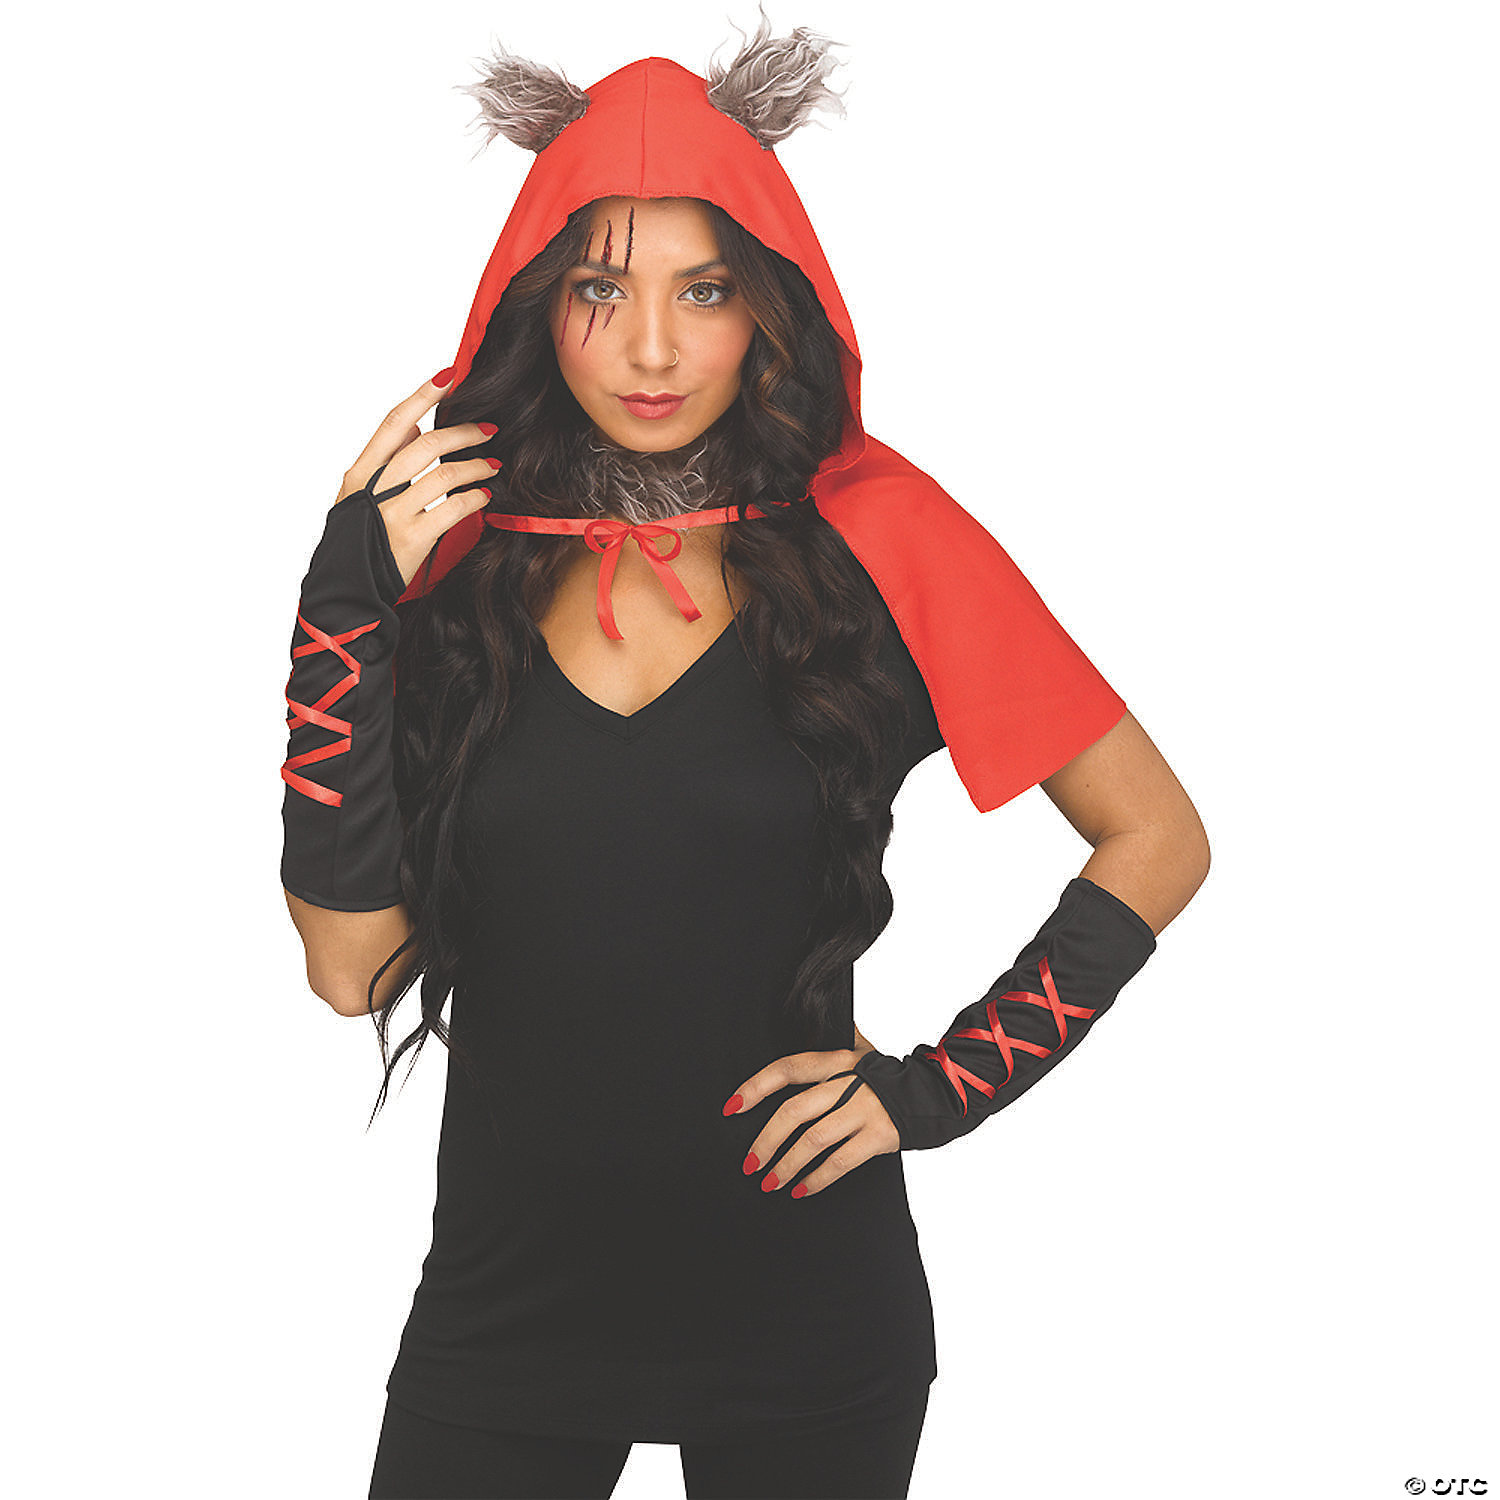 EDGY RED HOOD INSTANT KIT - ADULT - HALLOWEEN